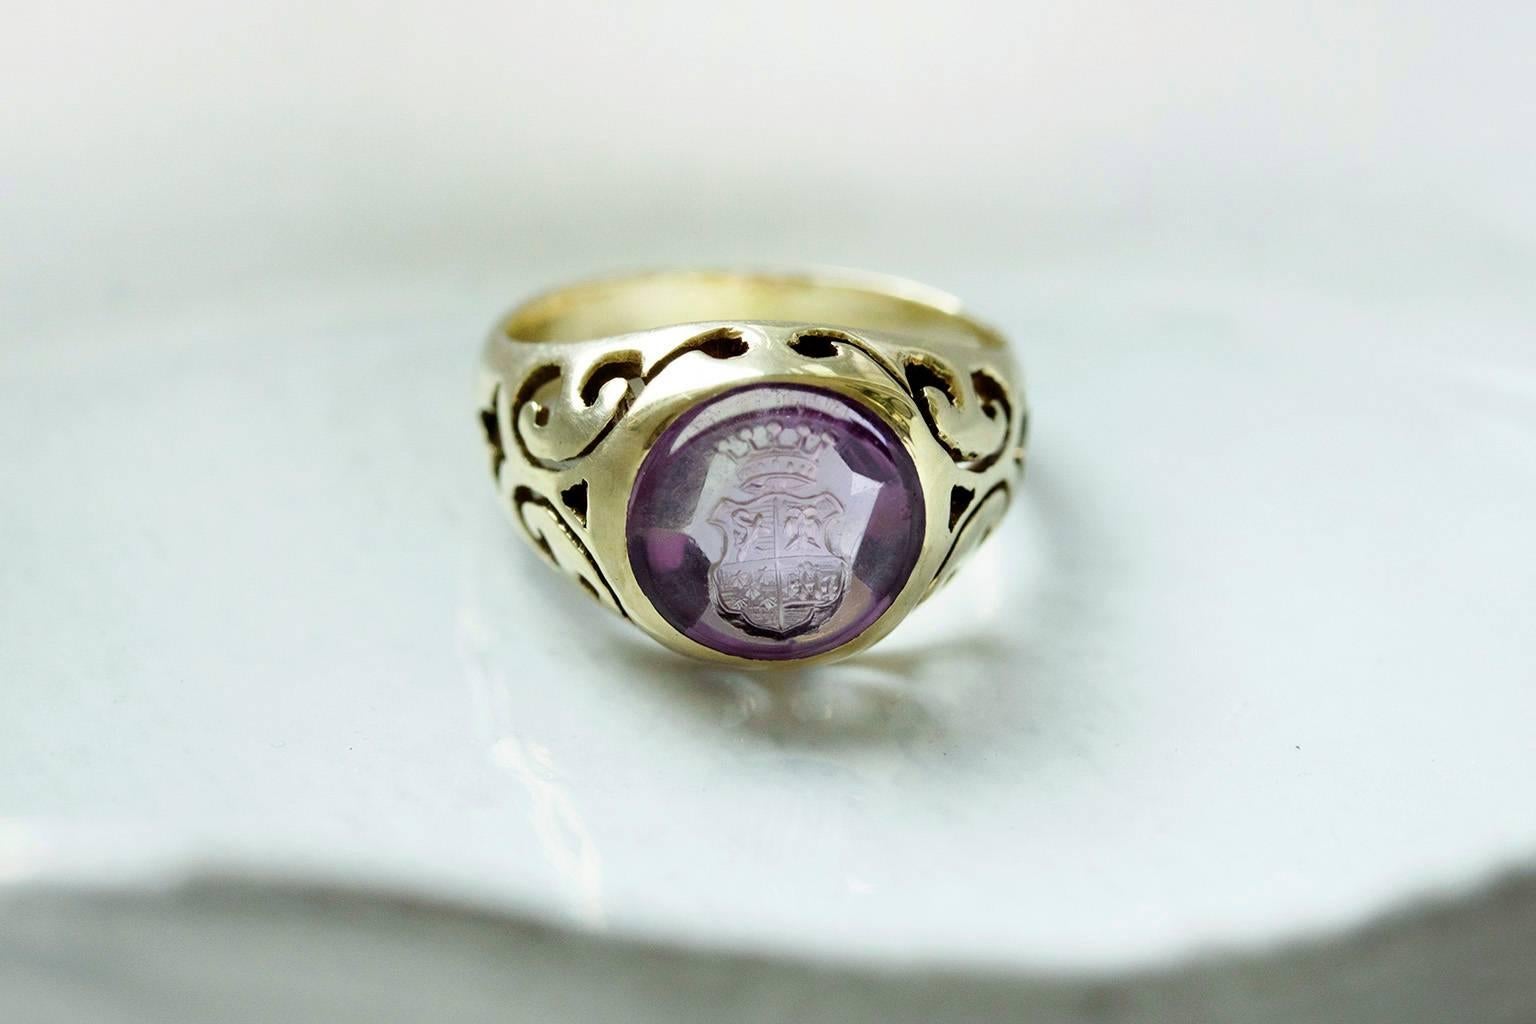 C.1900. An Edwardian amethyst crest intaglio ring. The ring features beautiful open work mount. The coronet in this intaglio indicates that it was carved for a noble family. It is a gorgeous unisex piece. The ring is 15k gold, and overall in great